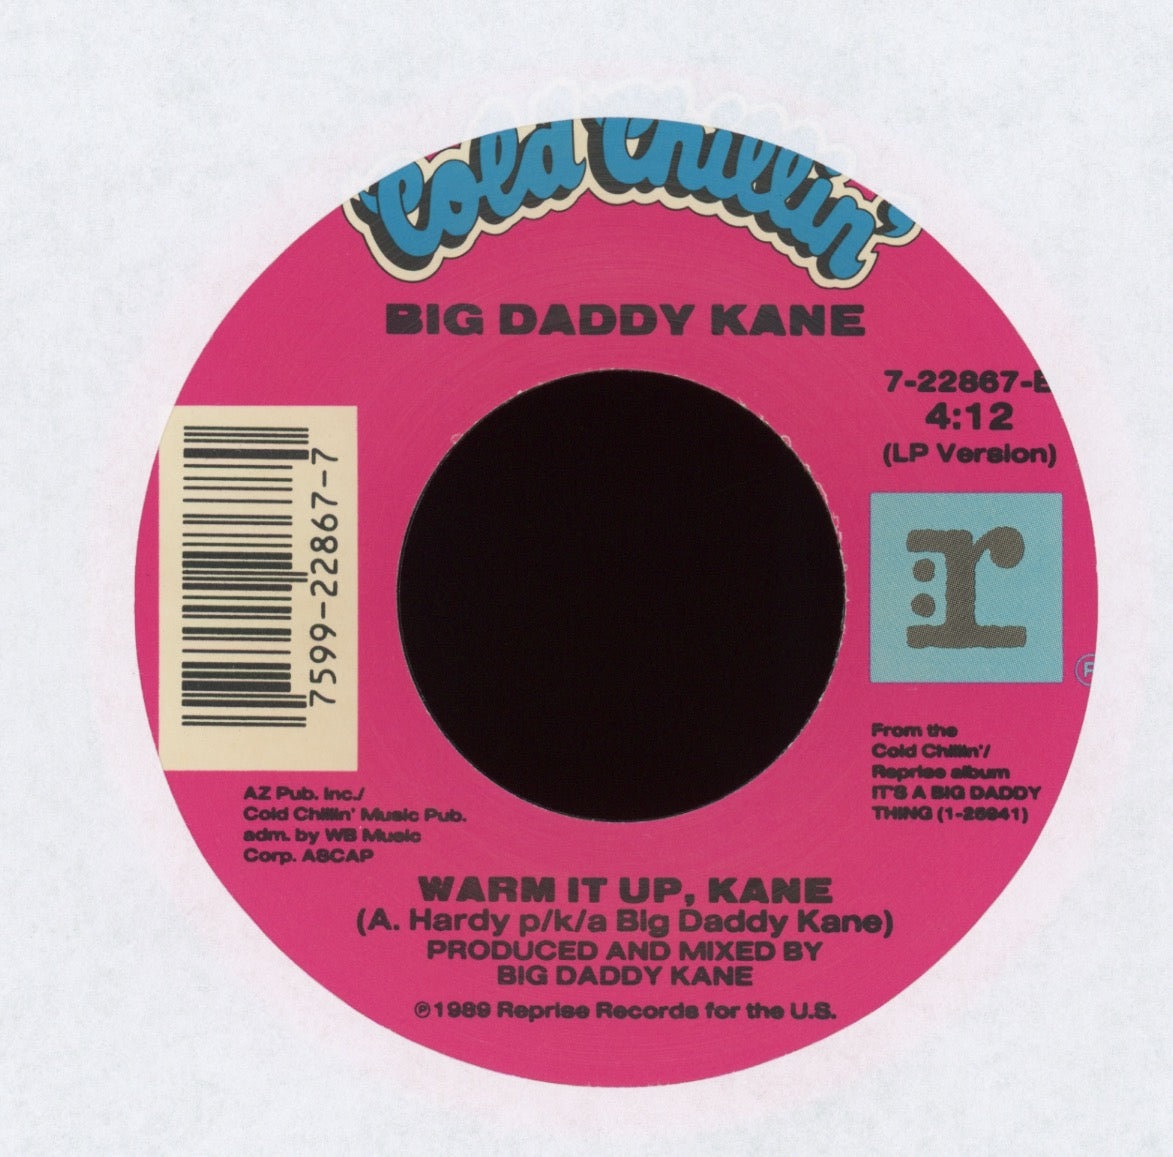 Big Daddy Kane - Smooth Operator on Cold Chillin' With Picture Sleeve